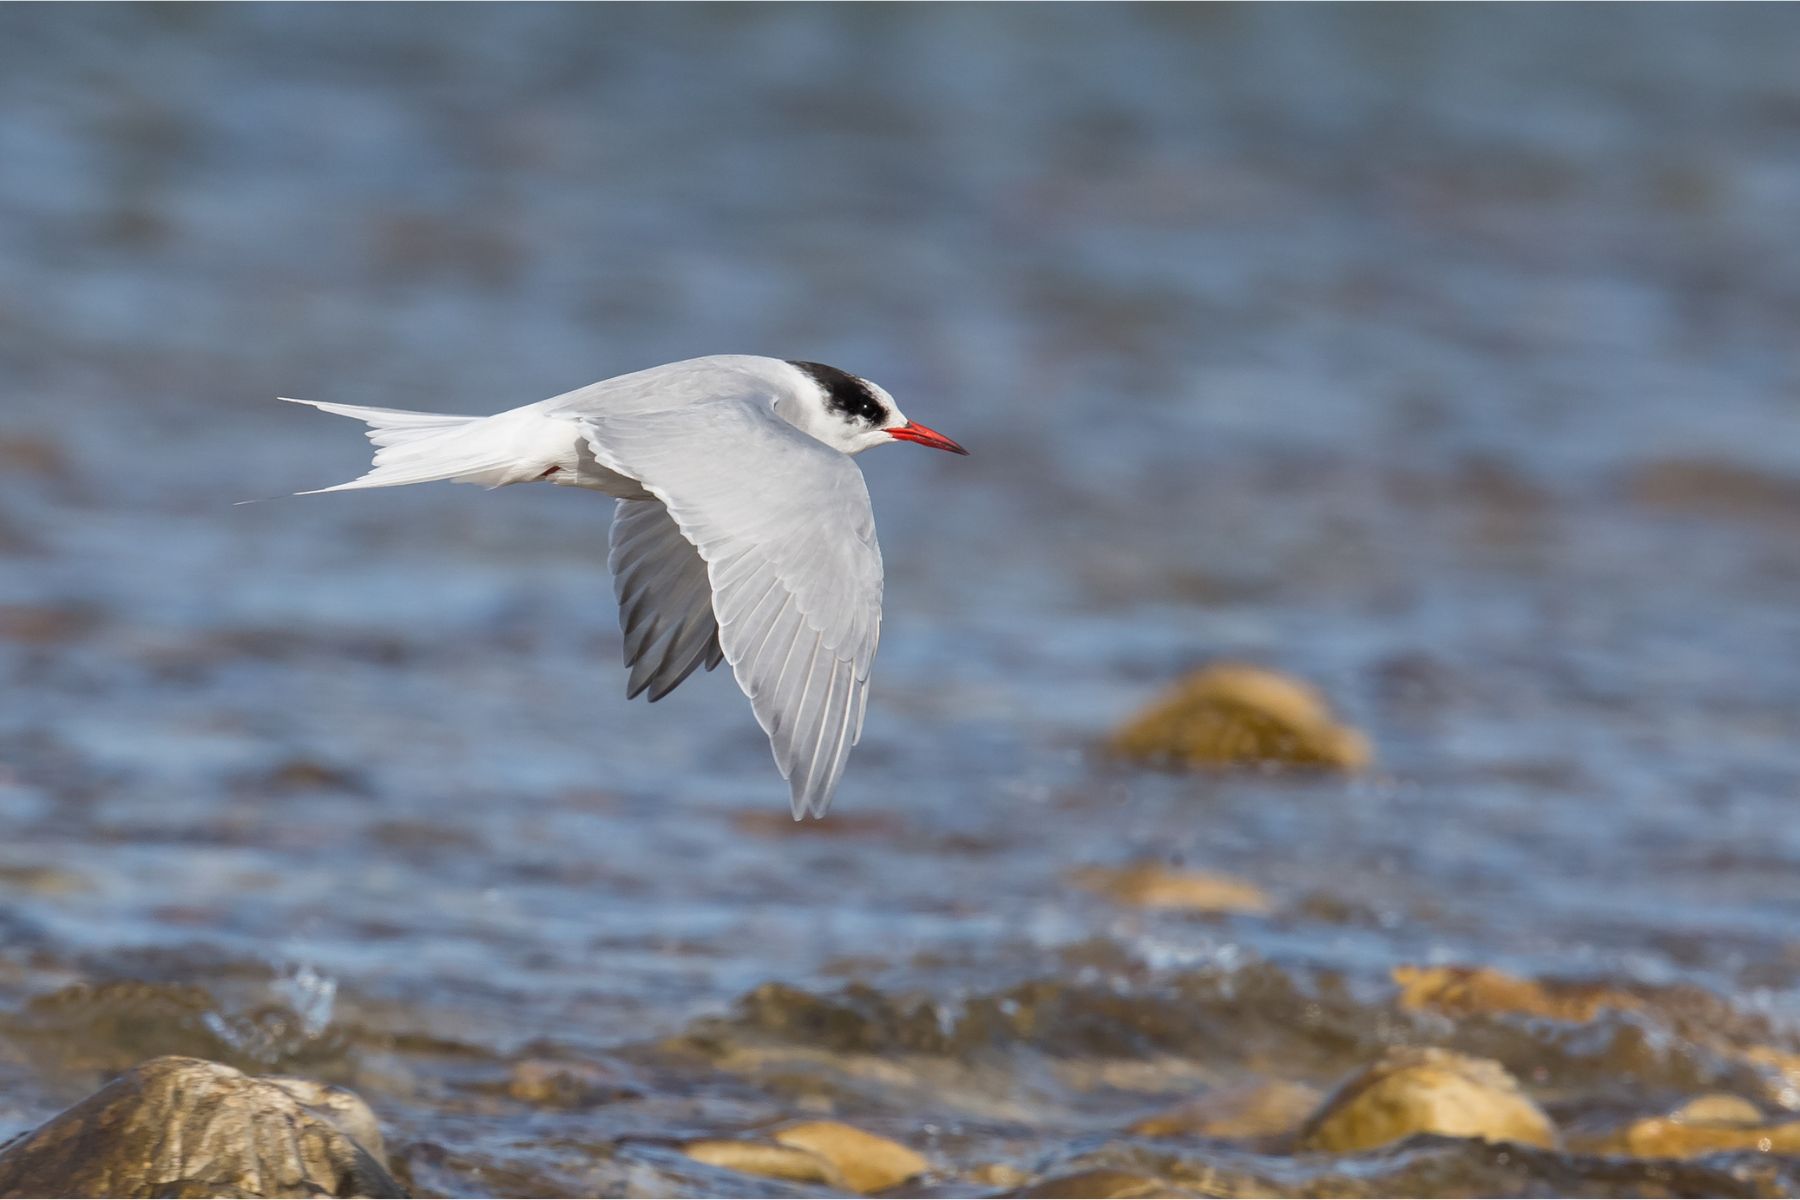 An adult Antarctic Tern in winter plumage, in flight against a blurred background of rocks and the sea, Cape Recife, South Africa